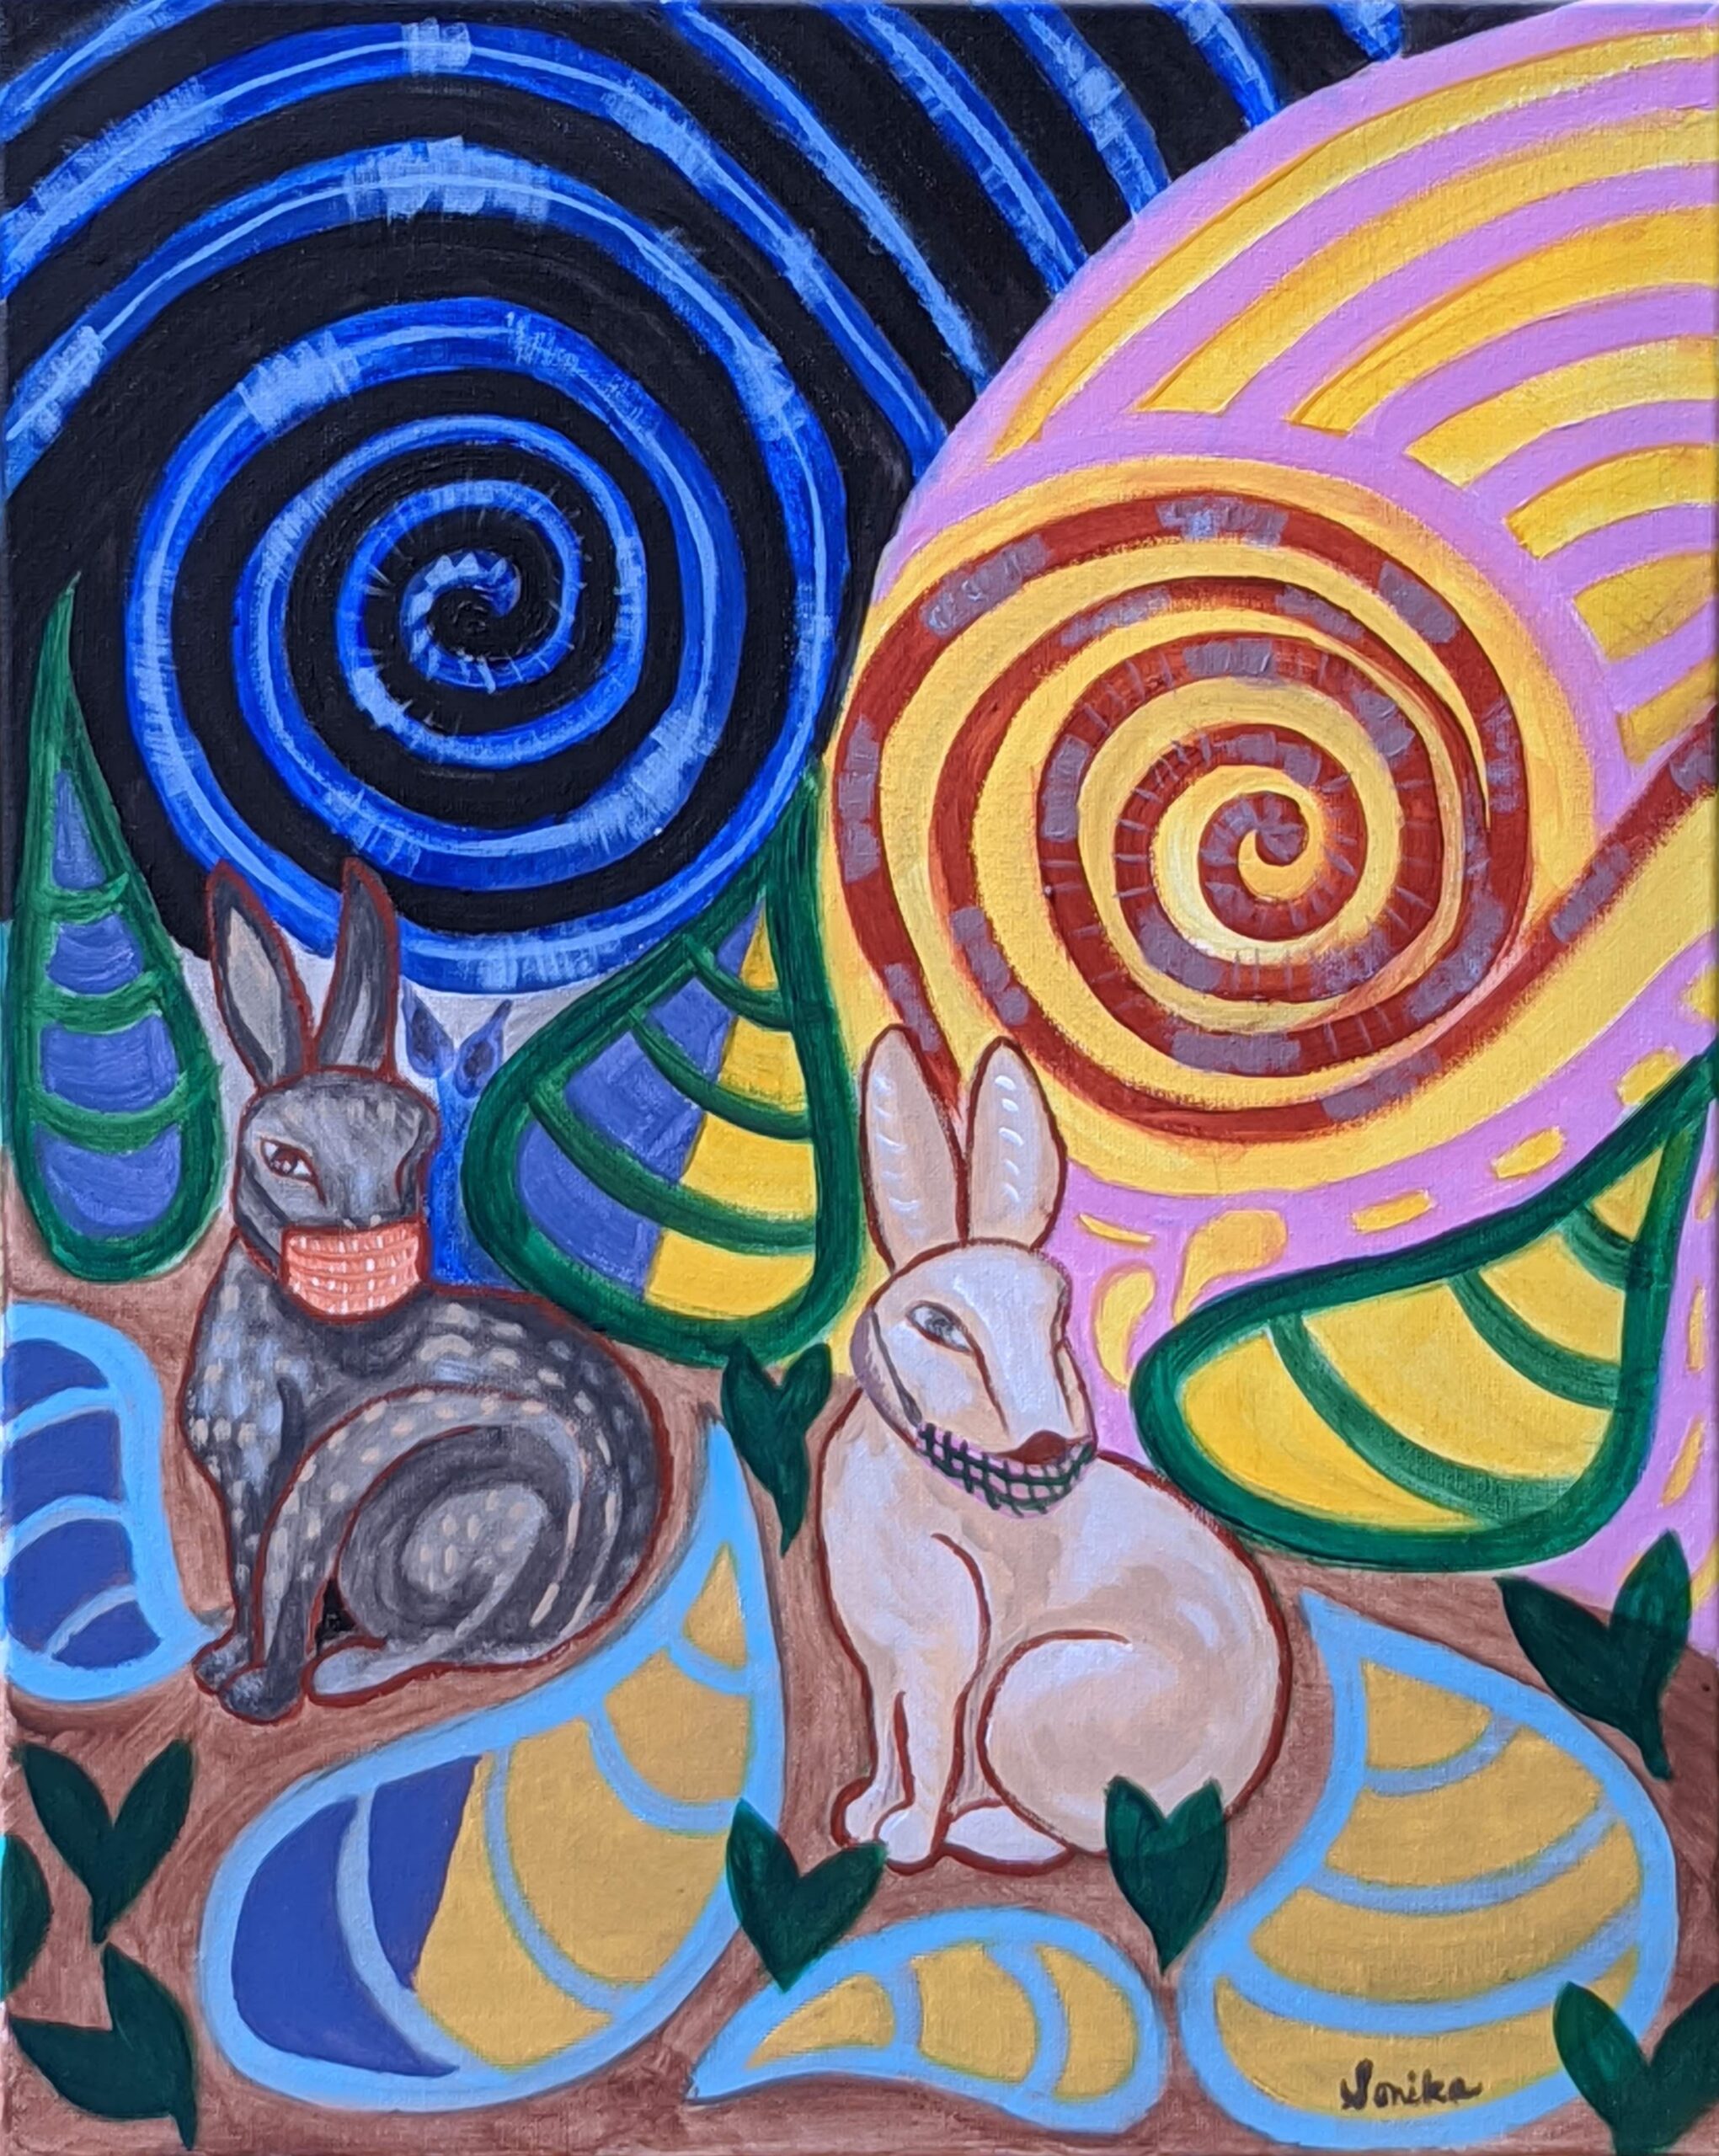 “We Shall Overcome: Hope And Justice (Bunnies)” by Sonika Gupta